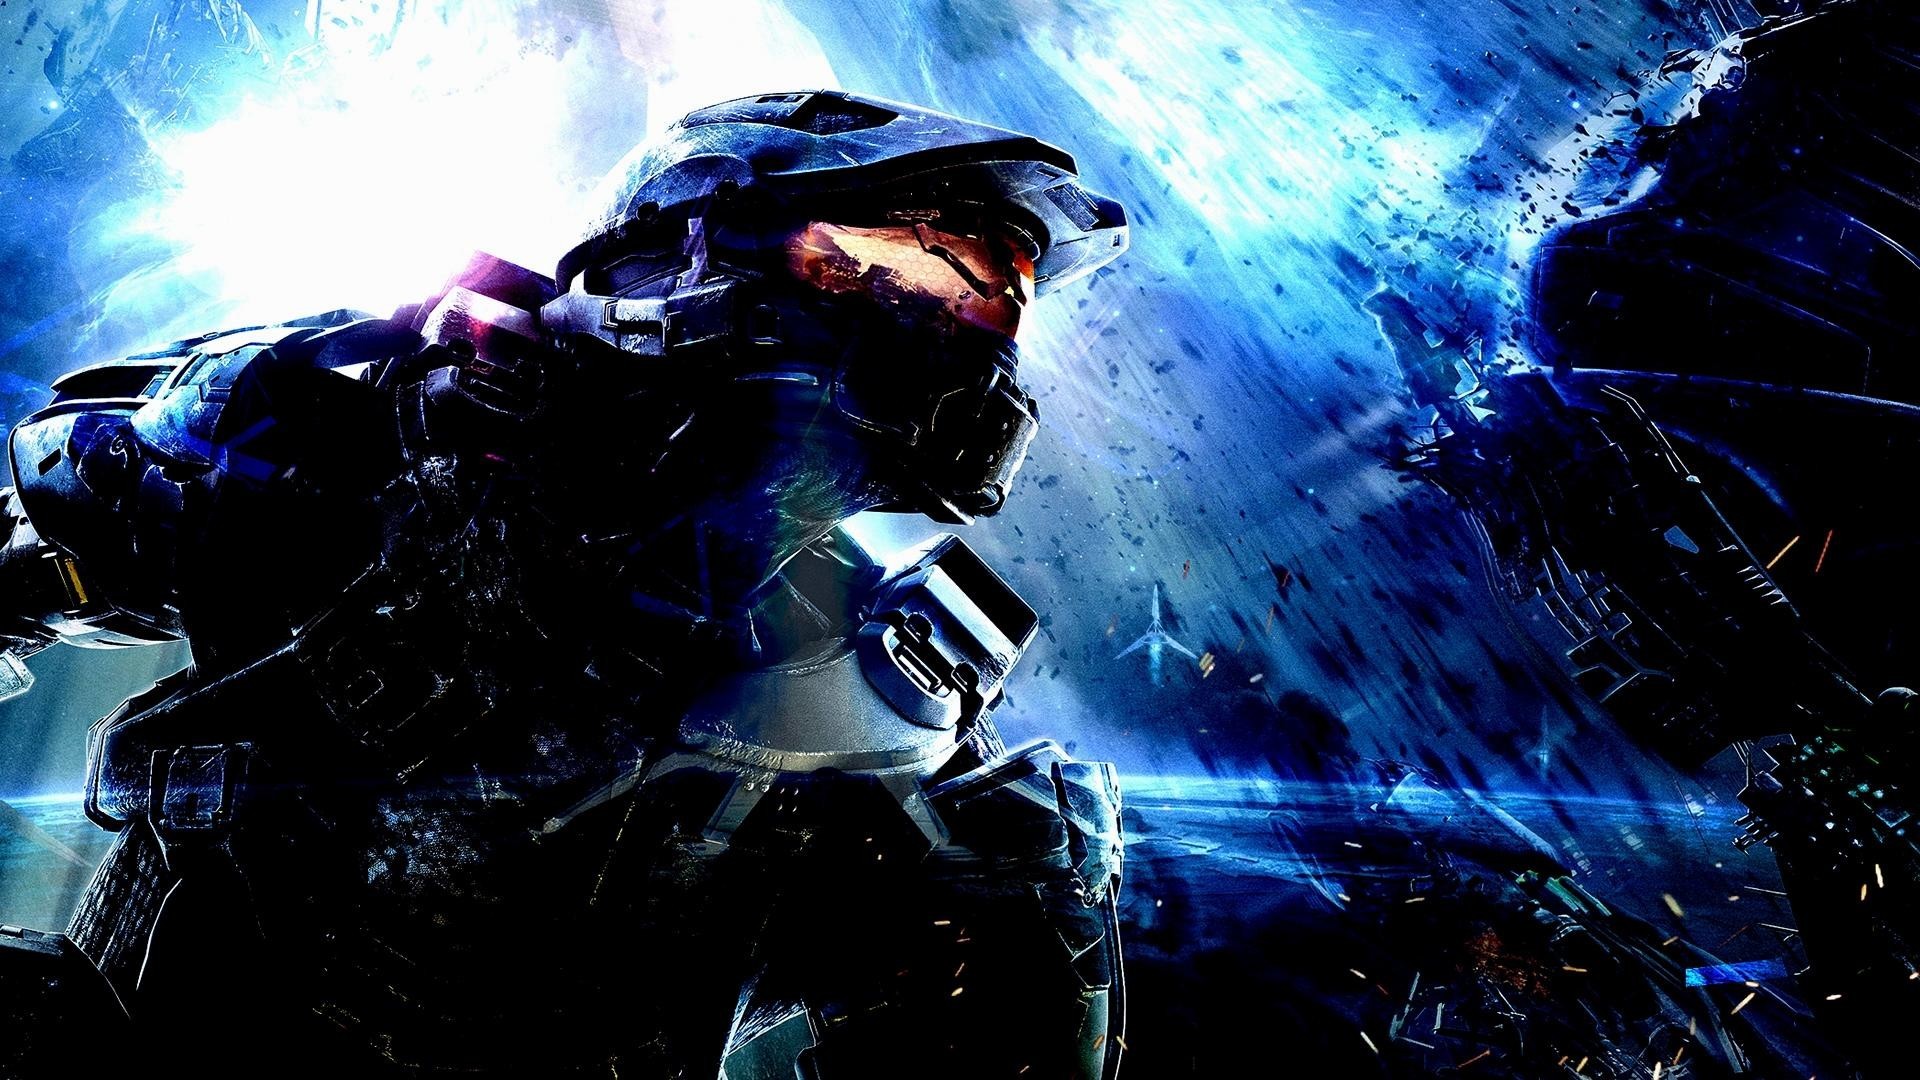 1920x1080 Halo 4 Wallpaper Source Â· Halo 4 Backgrounds HD